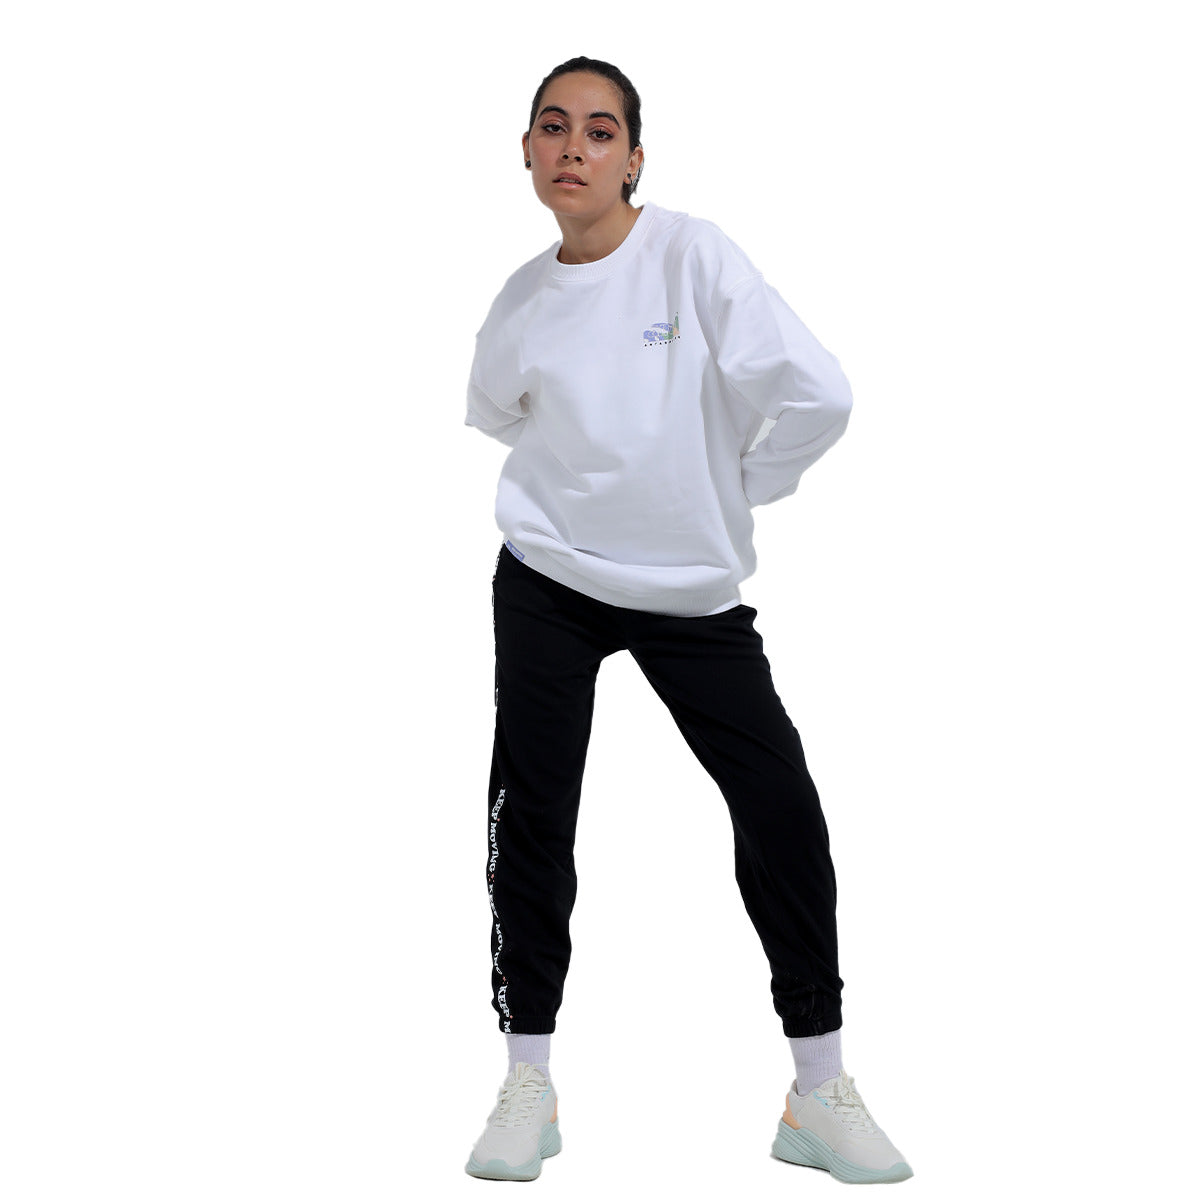 Anta Sweatshirt with Long Sleeves For Women, White